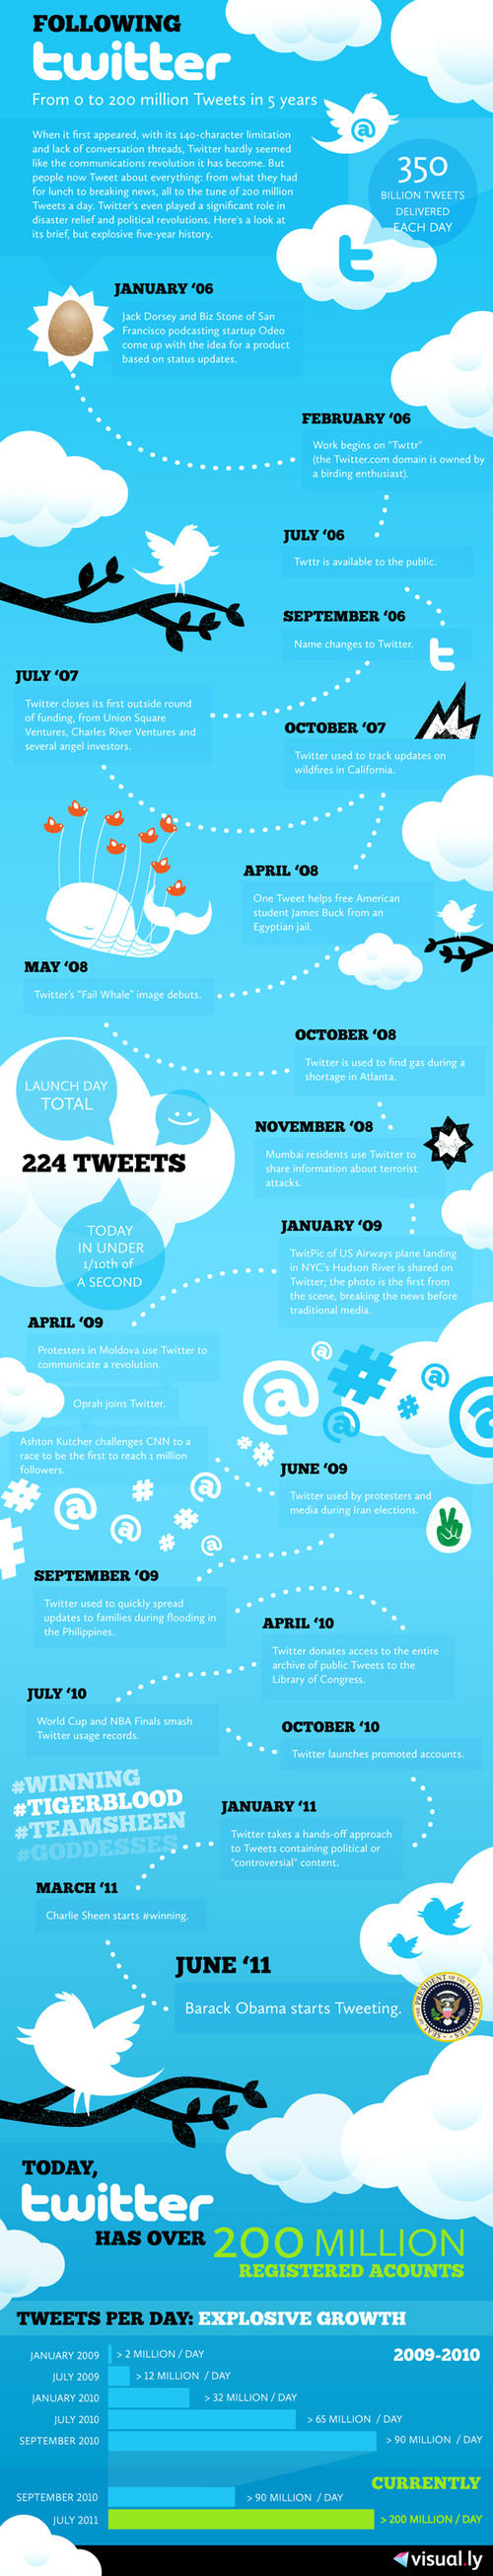 Following Twitter [infographic]